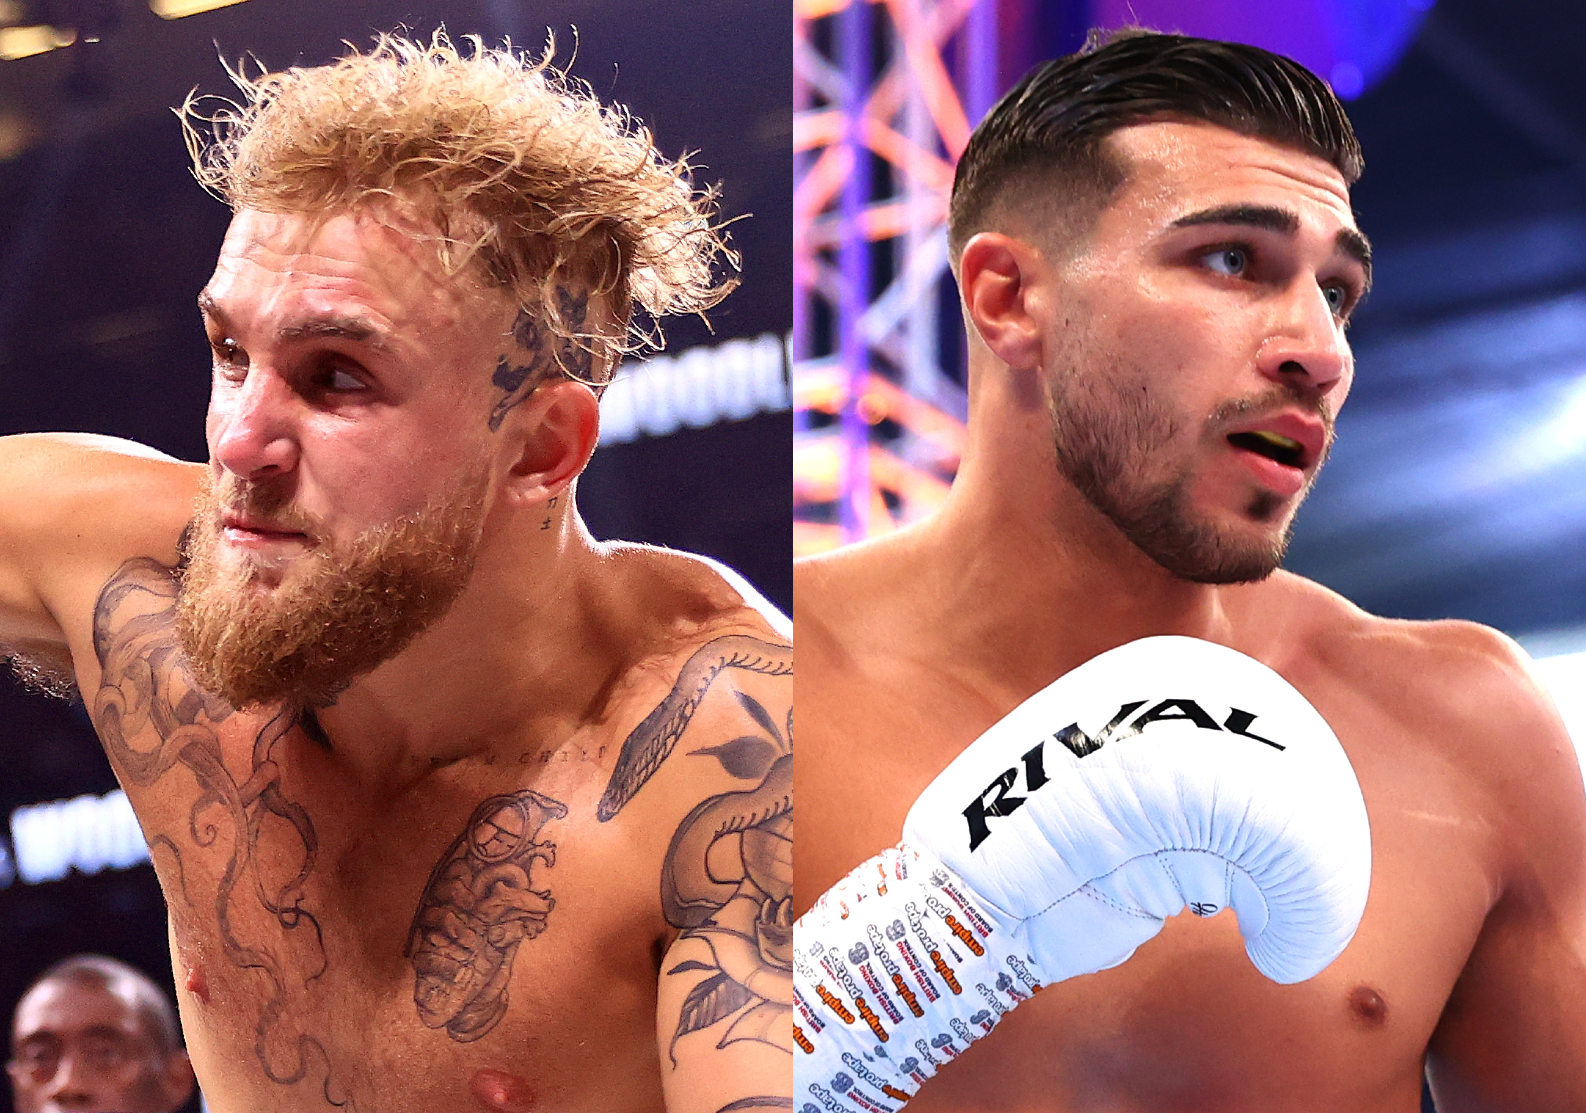 Jake Paul and Tommy Fury are once again maybe on course to fight